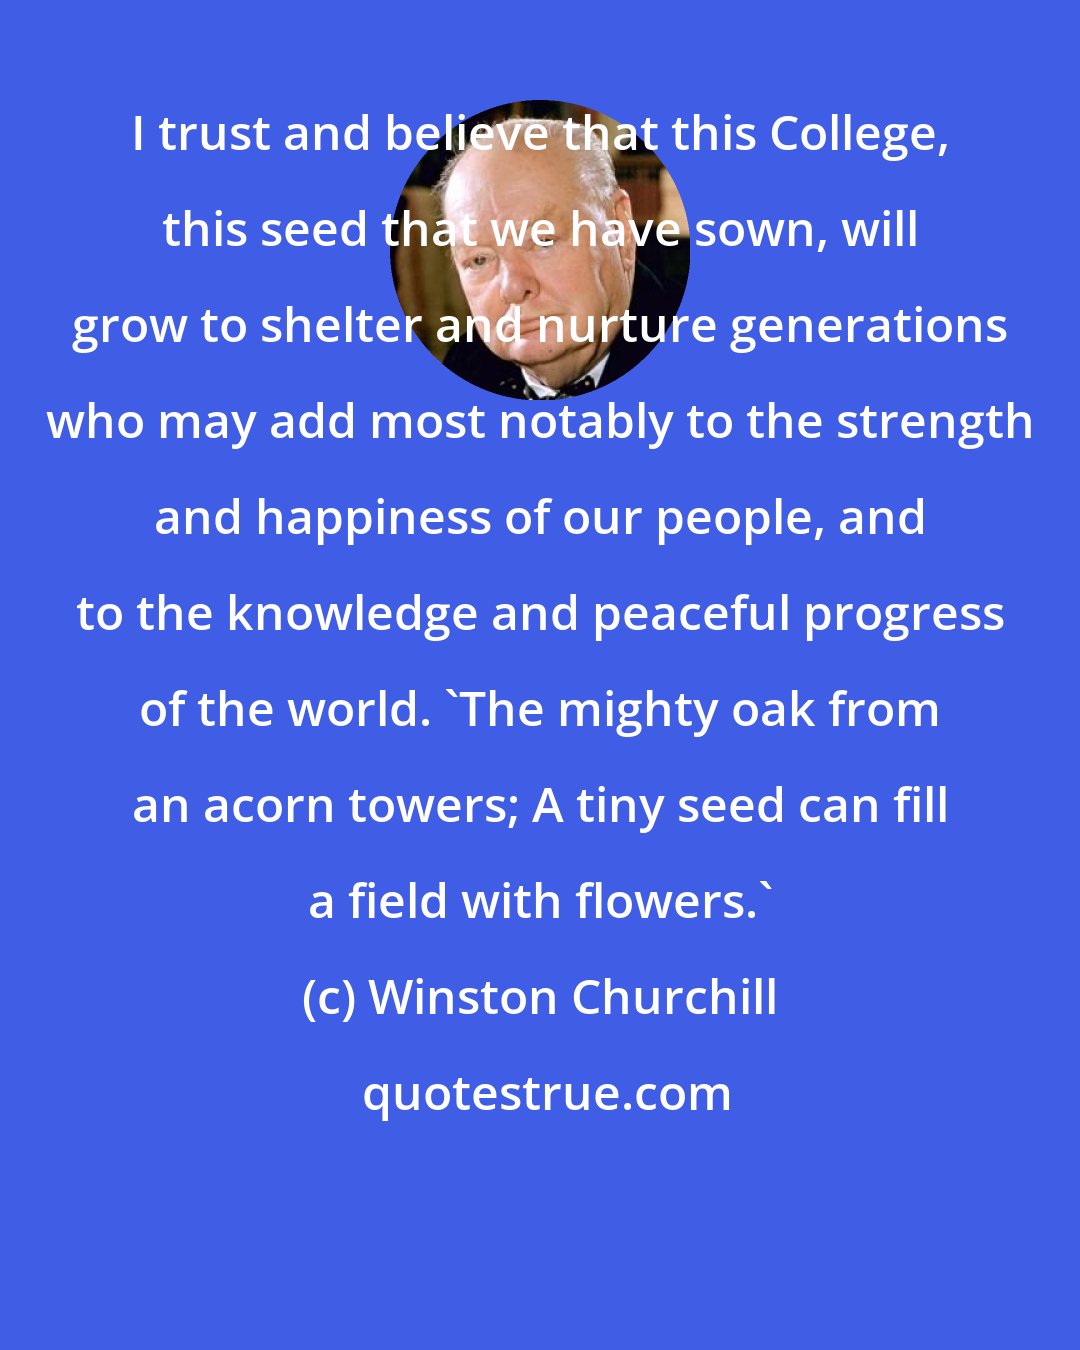 Winston Churchill: I trust and believe that this College, this seed that we have sown, will grow to shelter and nurture generations who may add most notably to the strength and happiness of our people, and to the knowledge and peaceful progress of the world. 'The mighty oak from an acorn towers; A tiny seed can fill a field with flowers.'